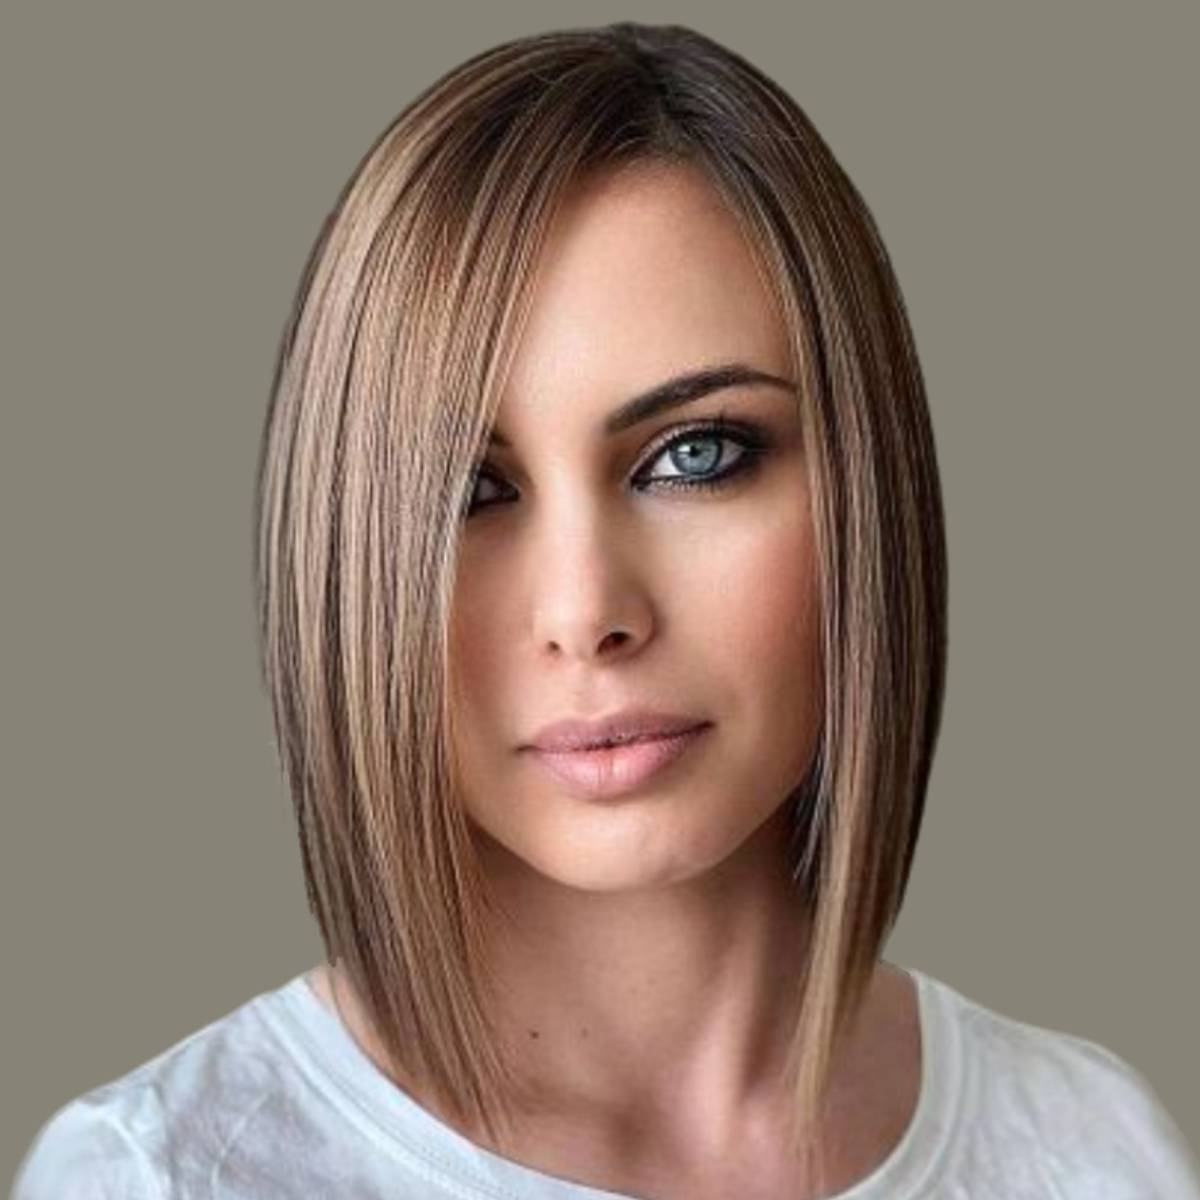 Blunt Bobs For Fine Thin Hair: Ways To Add Volume - nomore-vip